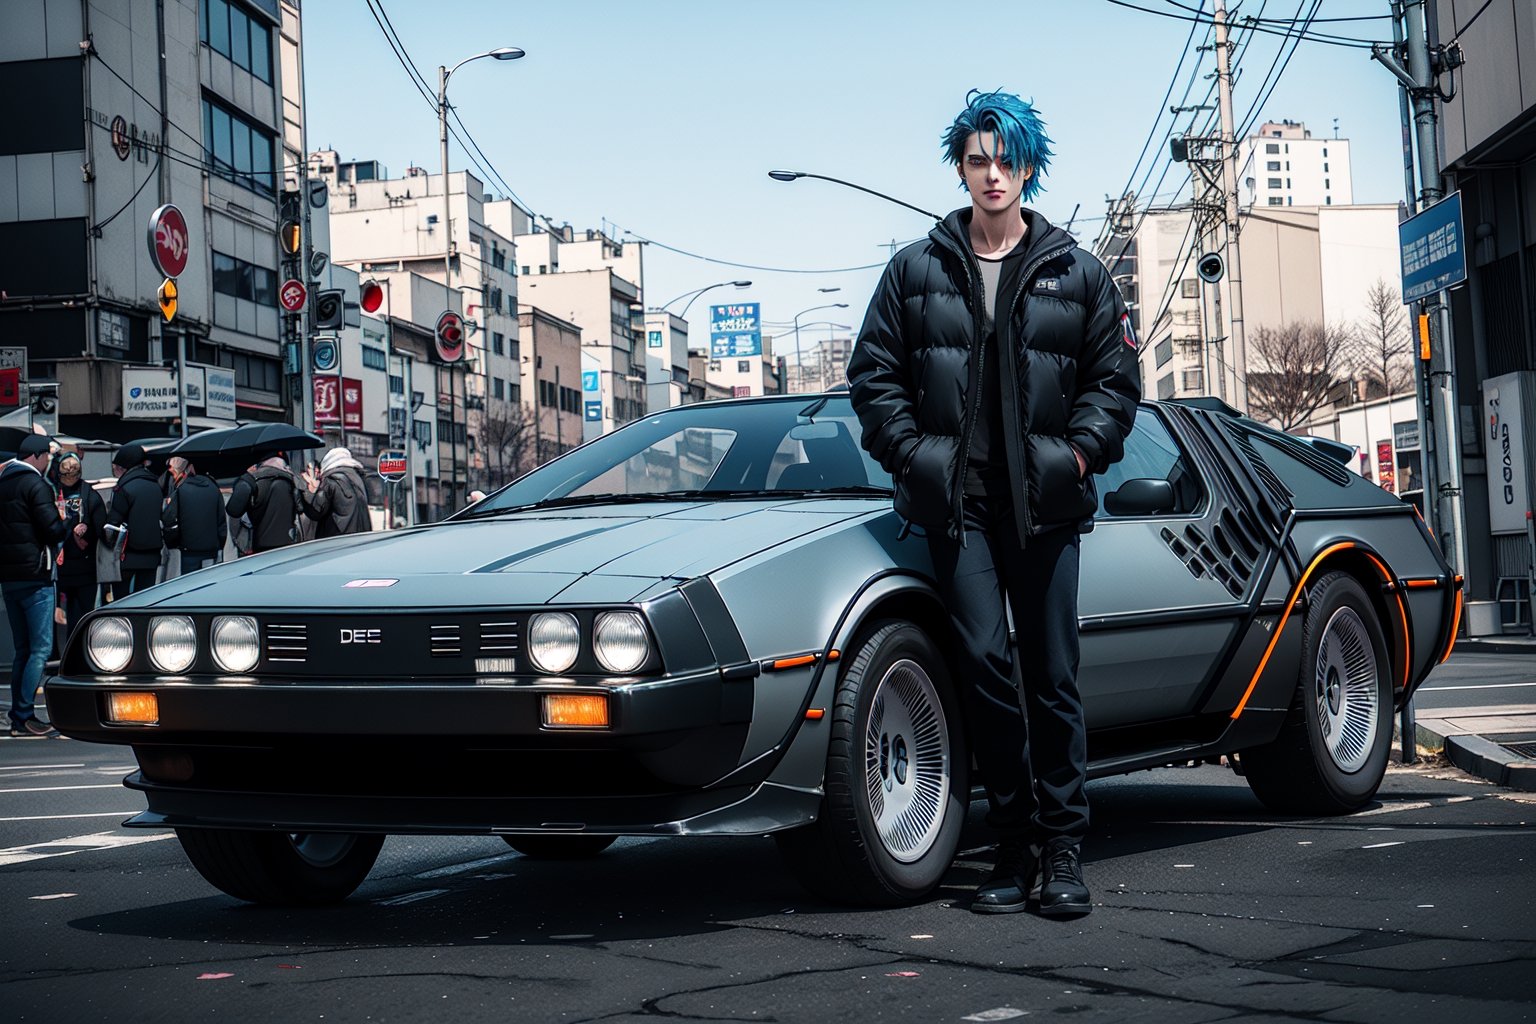 JustFallenOfficial standing next to a futuristic black delorean from film Back to the Future car,photorealistic emo blue hair tuned car, cyberpunk city background